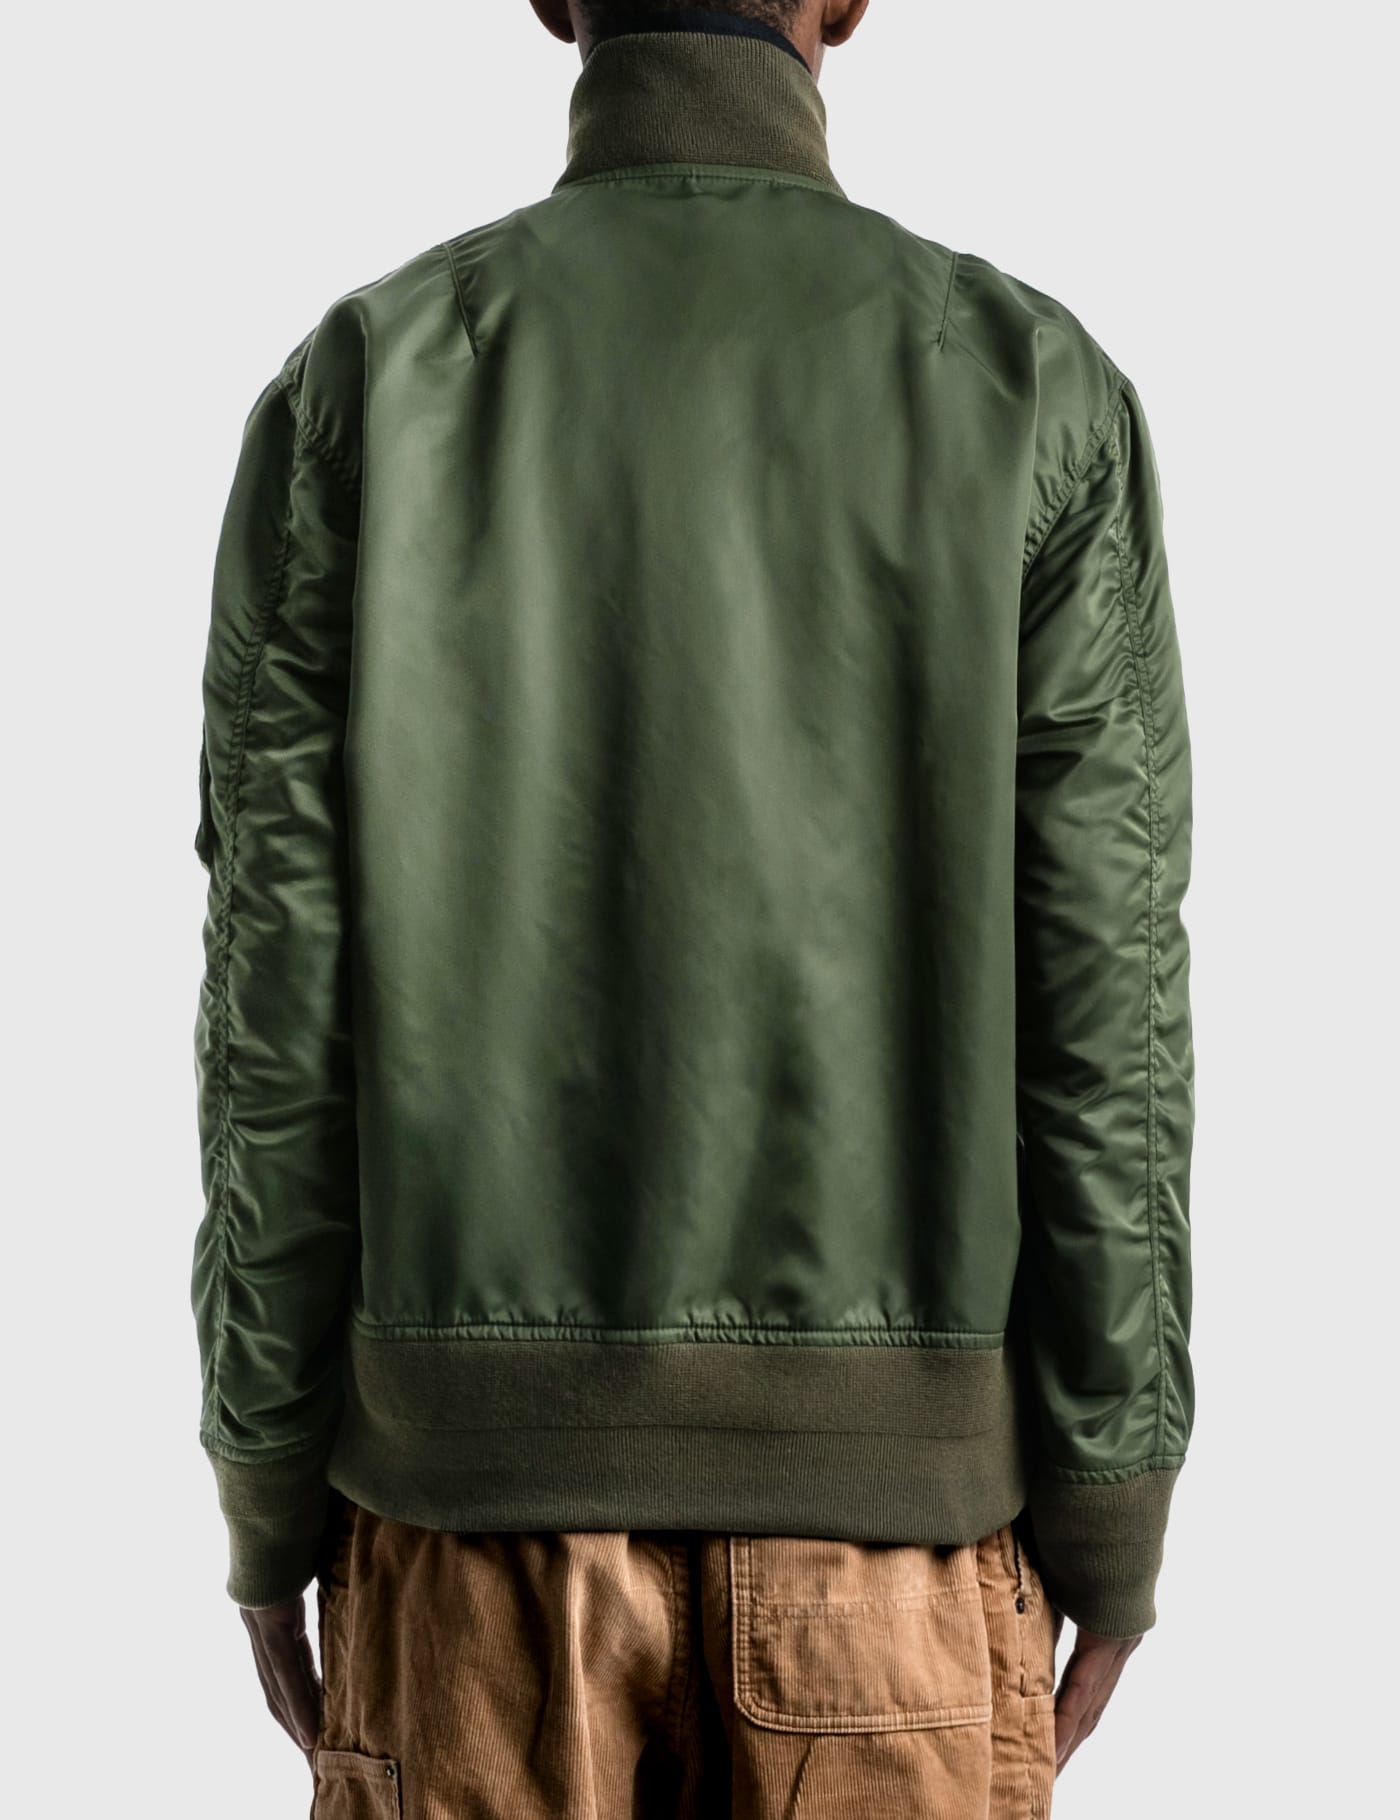 Sacai - MA-1 Blouson | HBX - Globally Curated Fashion and Lifestyle by  Hypebeast